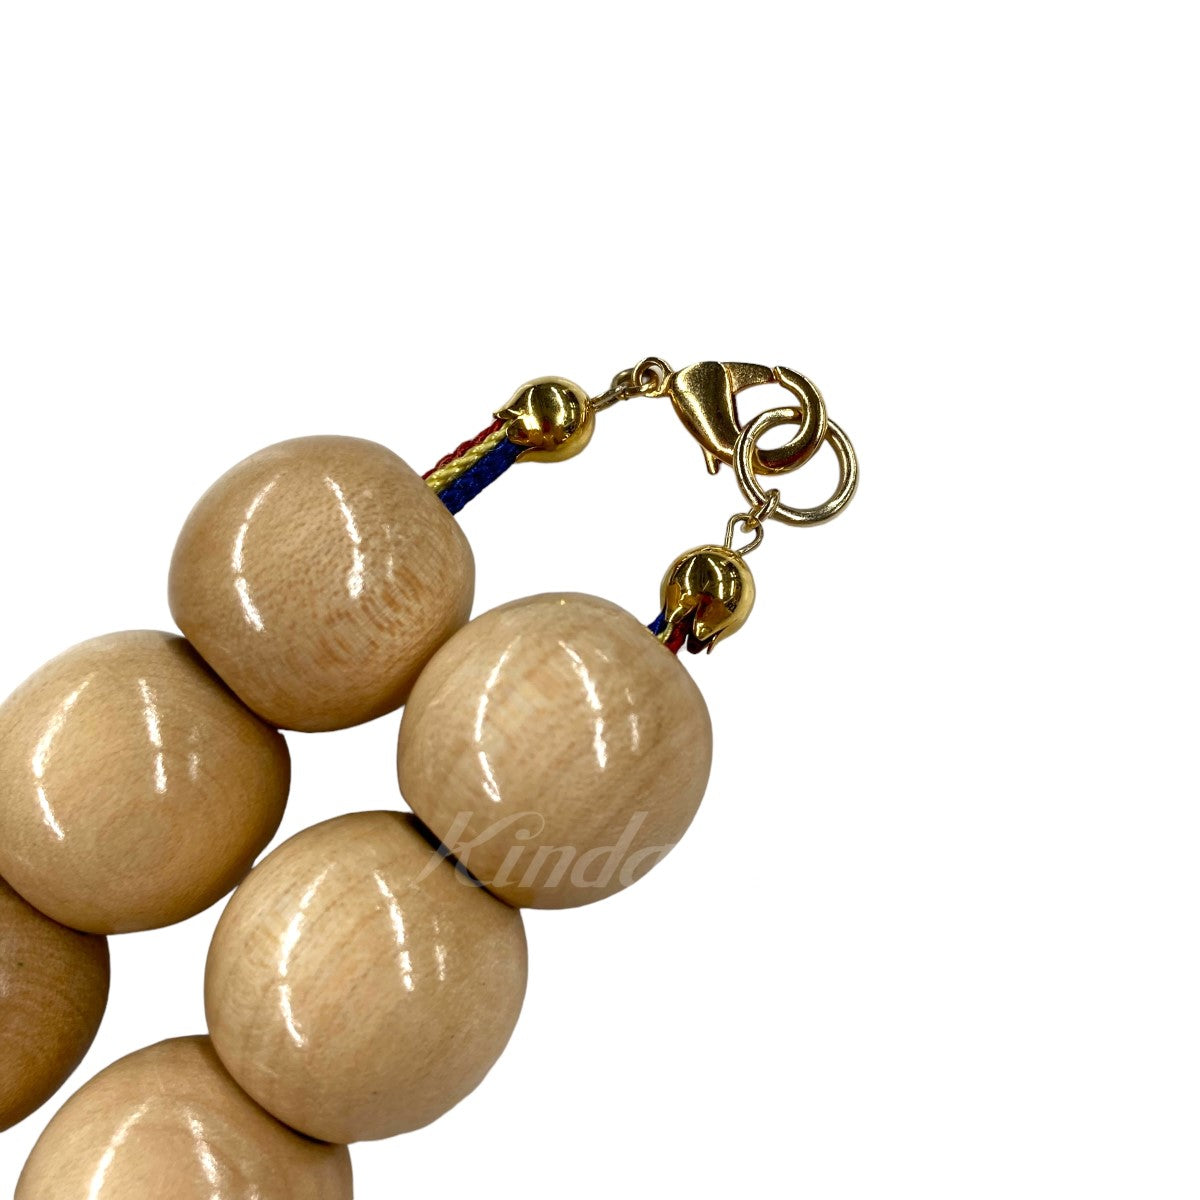 「WOOD BEADS NECKLACE」 ウッドネックレス